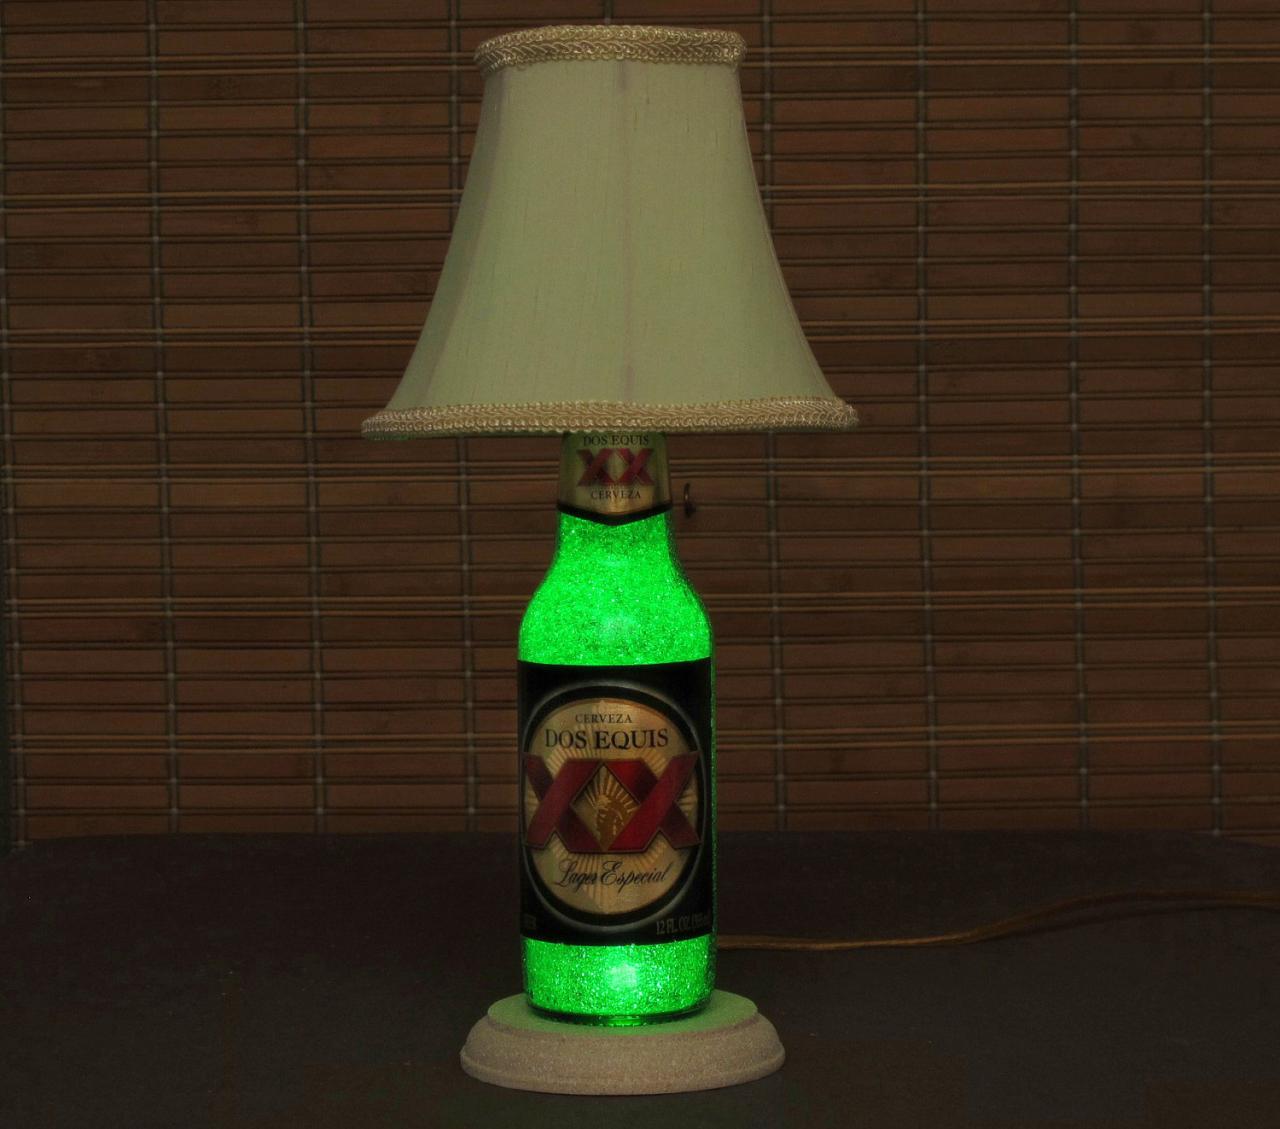 Dos Equis Beer Bottle Lamp/bar Light- W/ Shade Video Demo /11 Year Led - Intense Green Glow /"diamond Like" Glass Crystals On